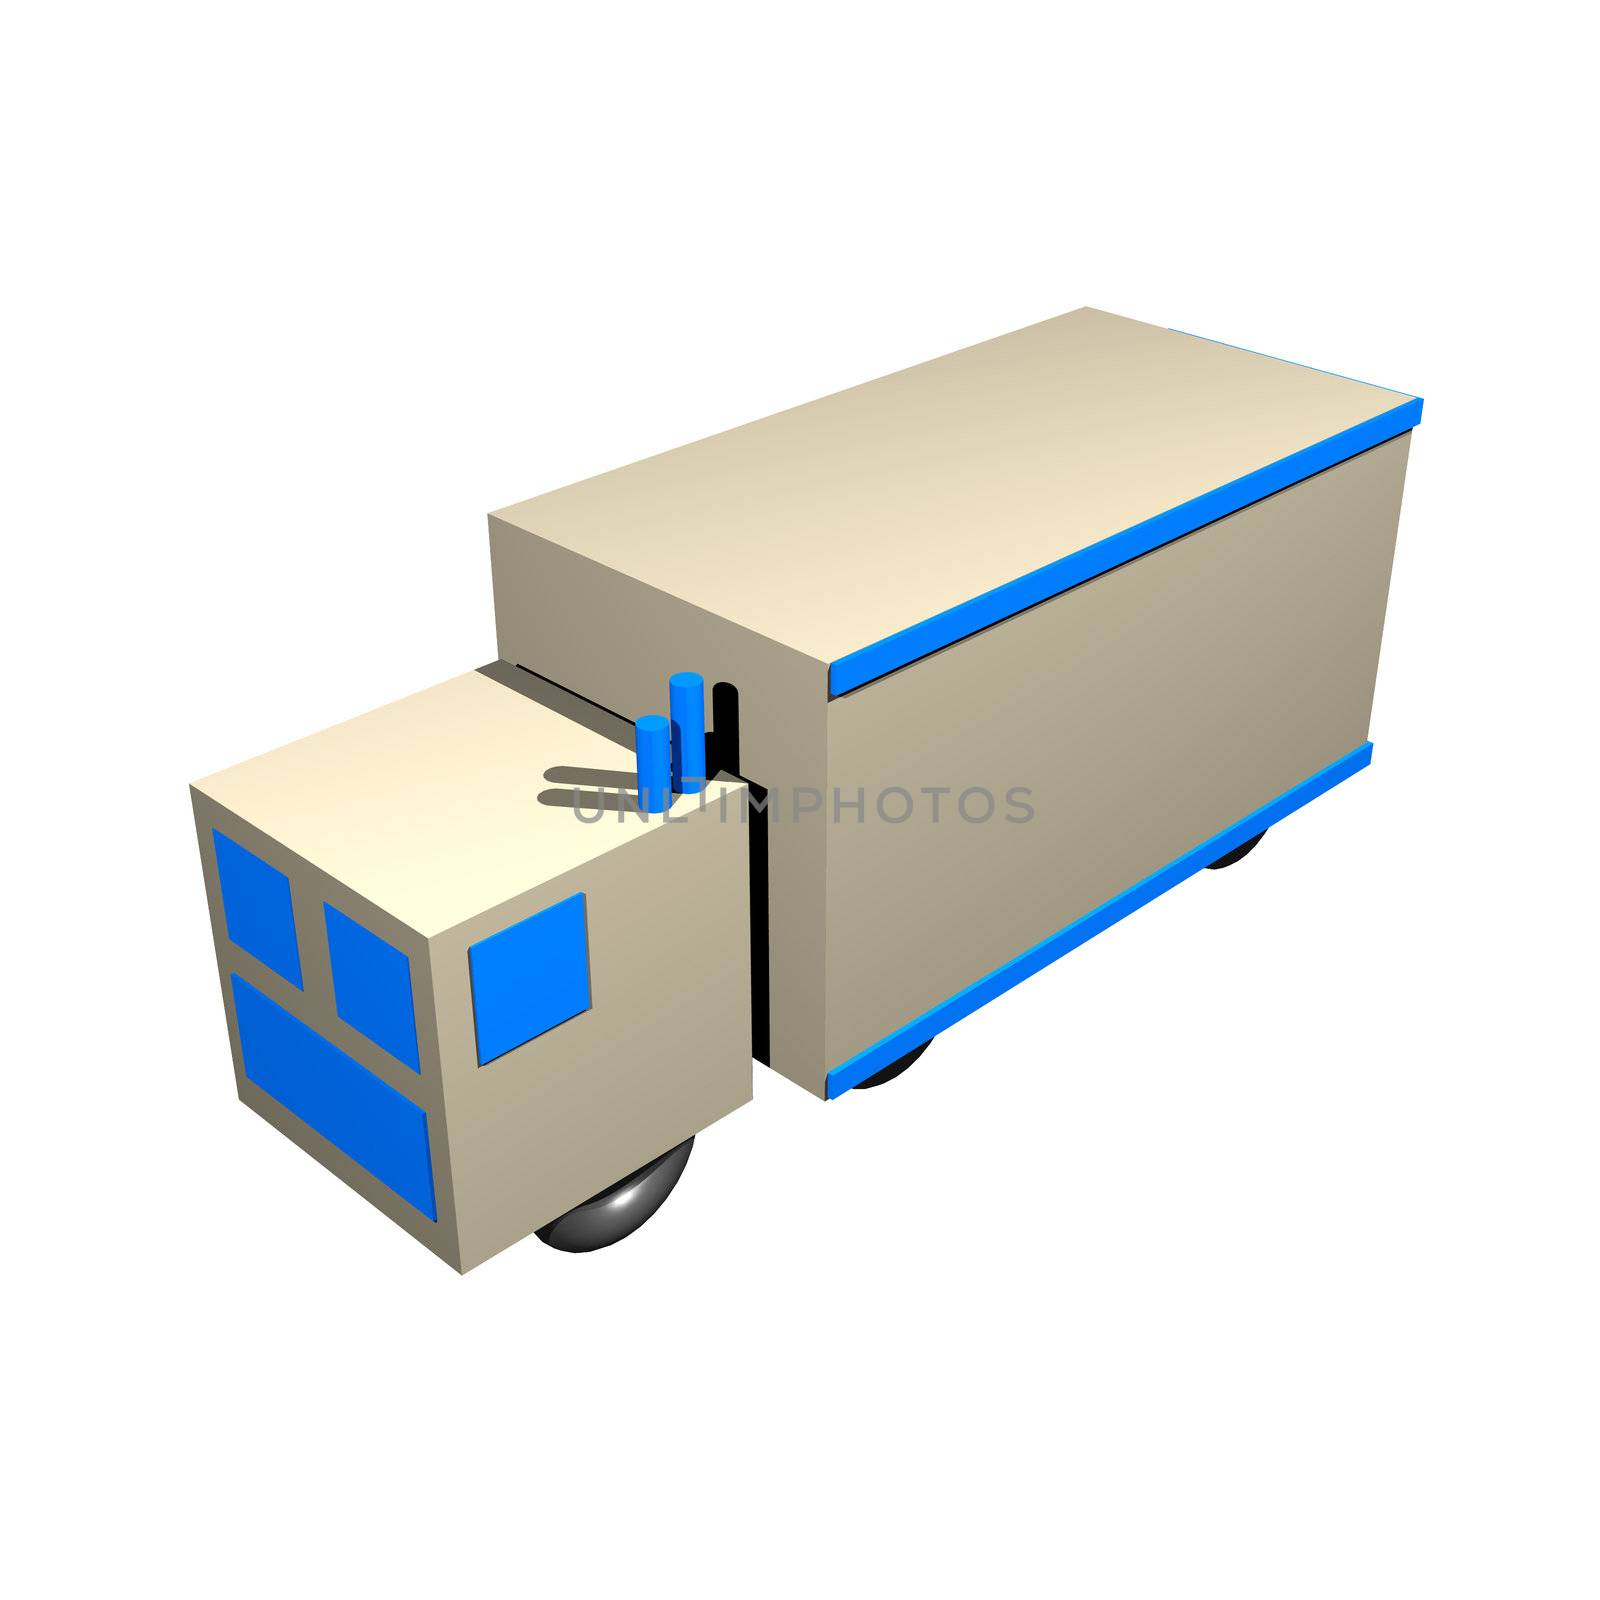 Truck Clip Art Isolated on a White Background